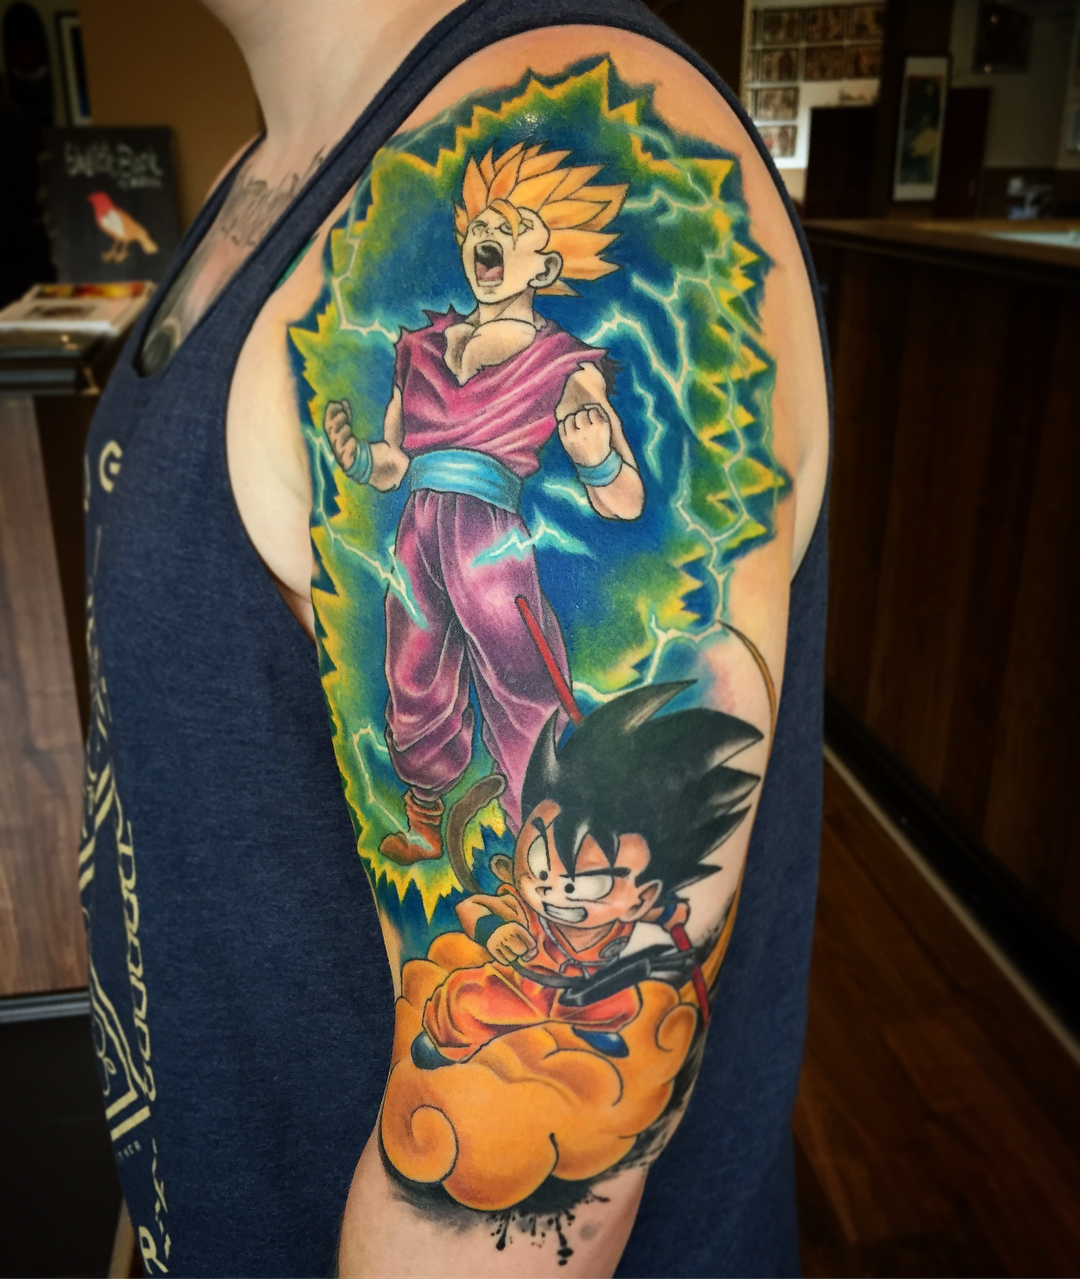 Another nerd tattoo.
Everything healed except the greens and yellows in the back...